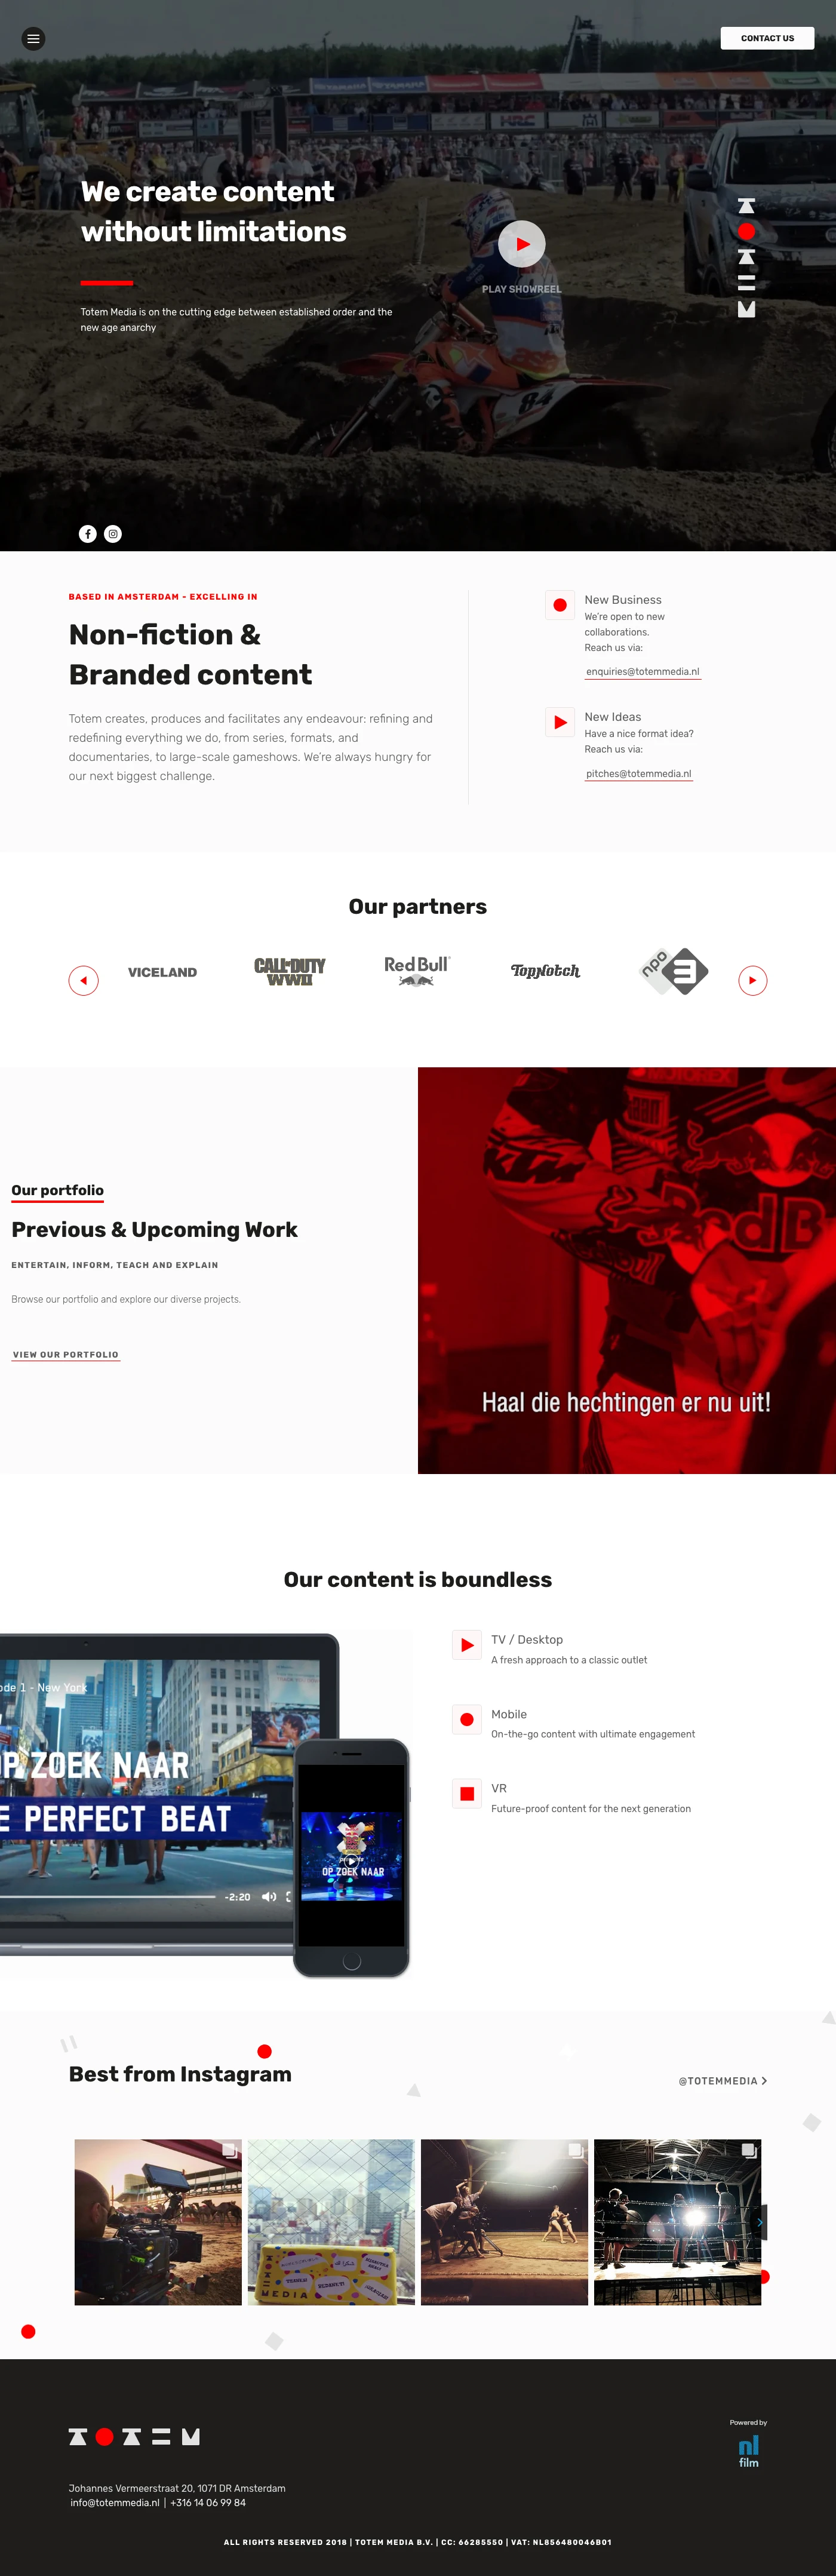 Totem Media Landing Page Example: Production company from Amsterdam, powered by NL Film and EndemolShine